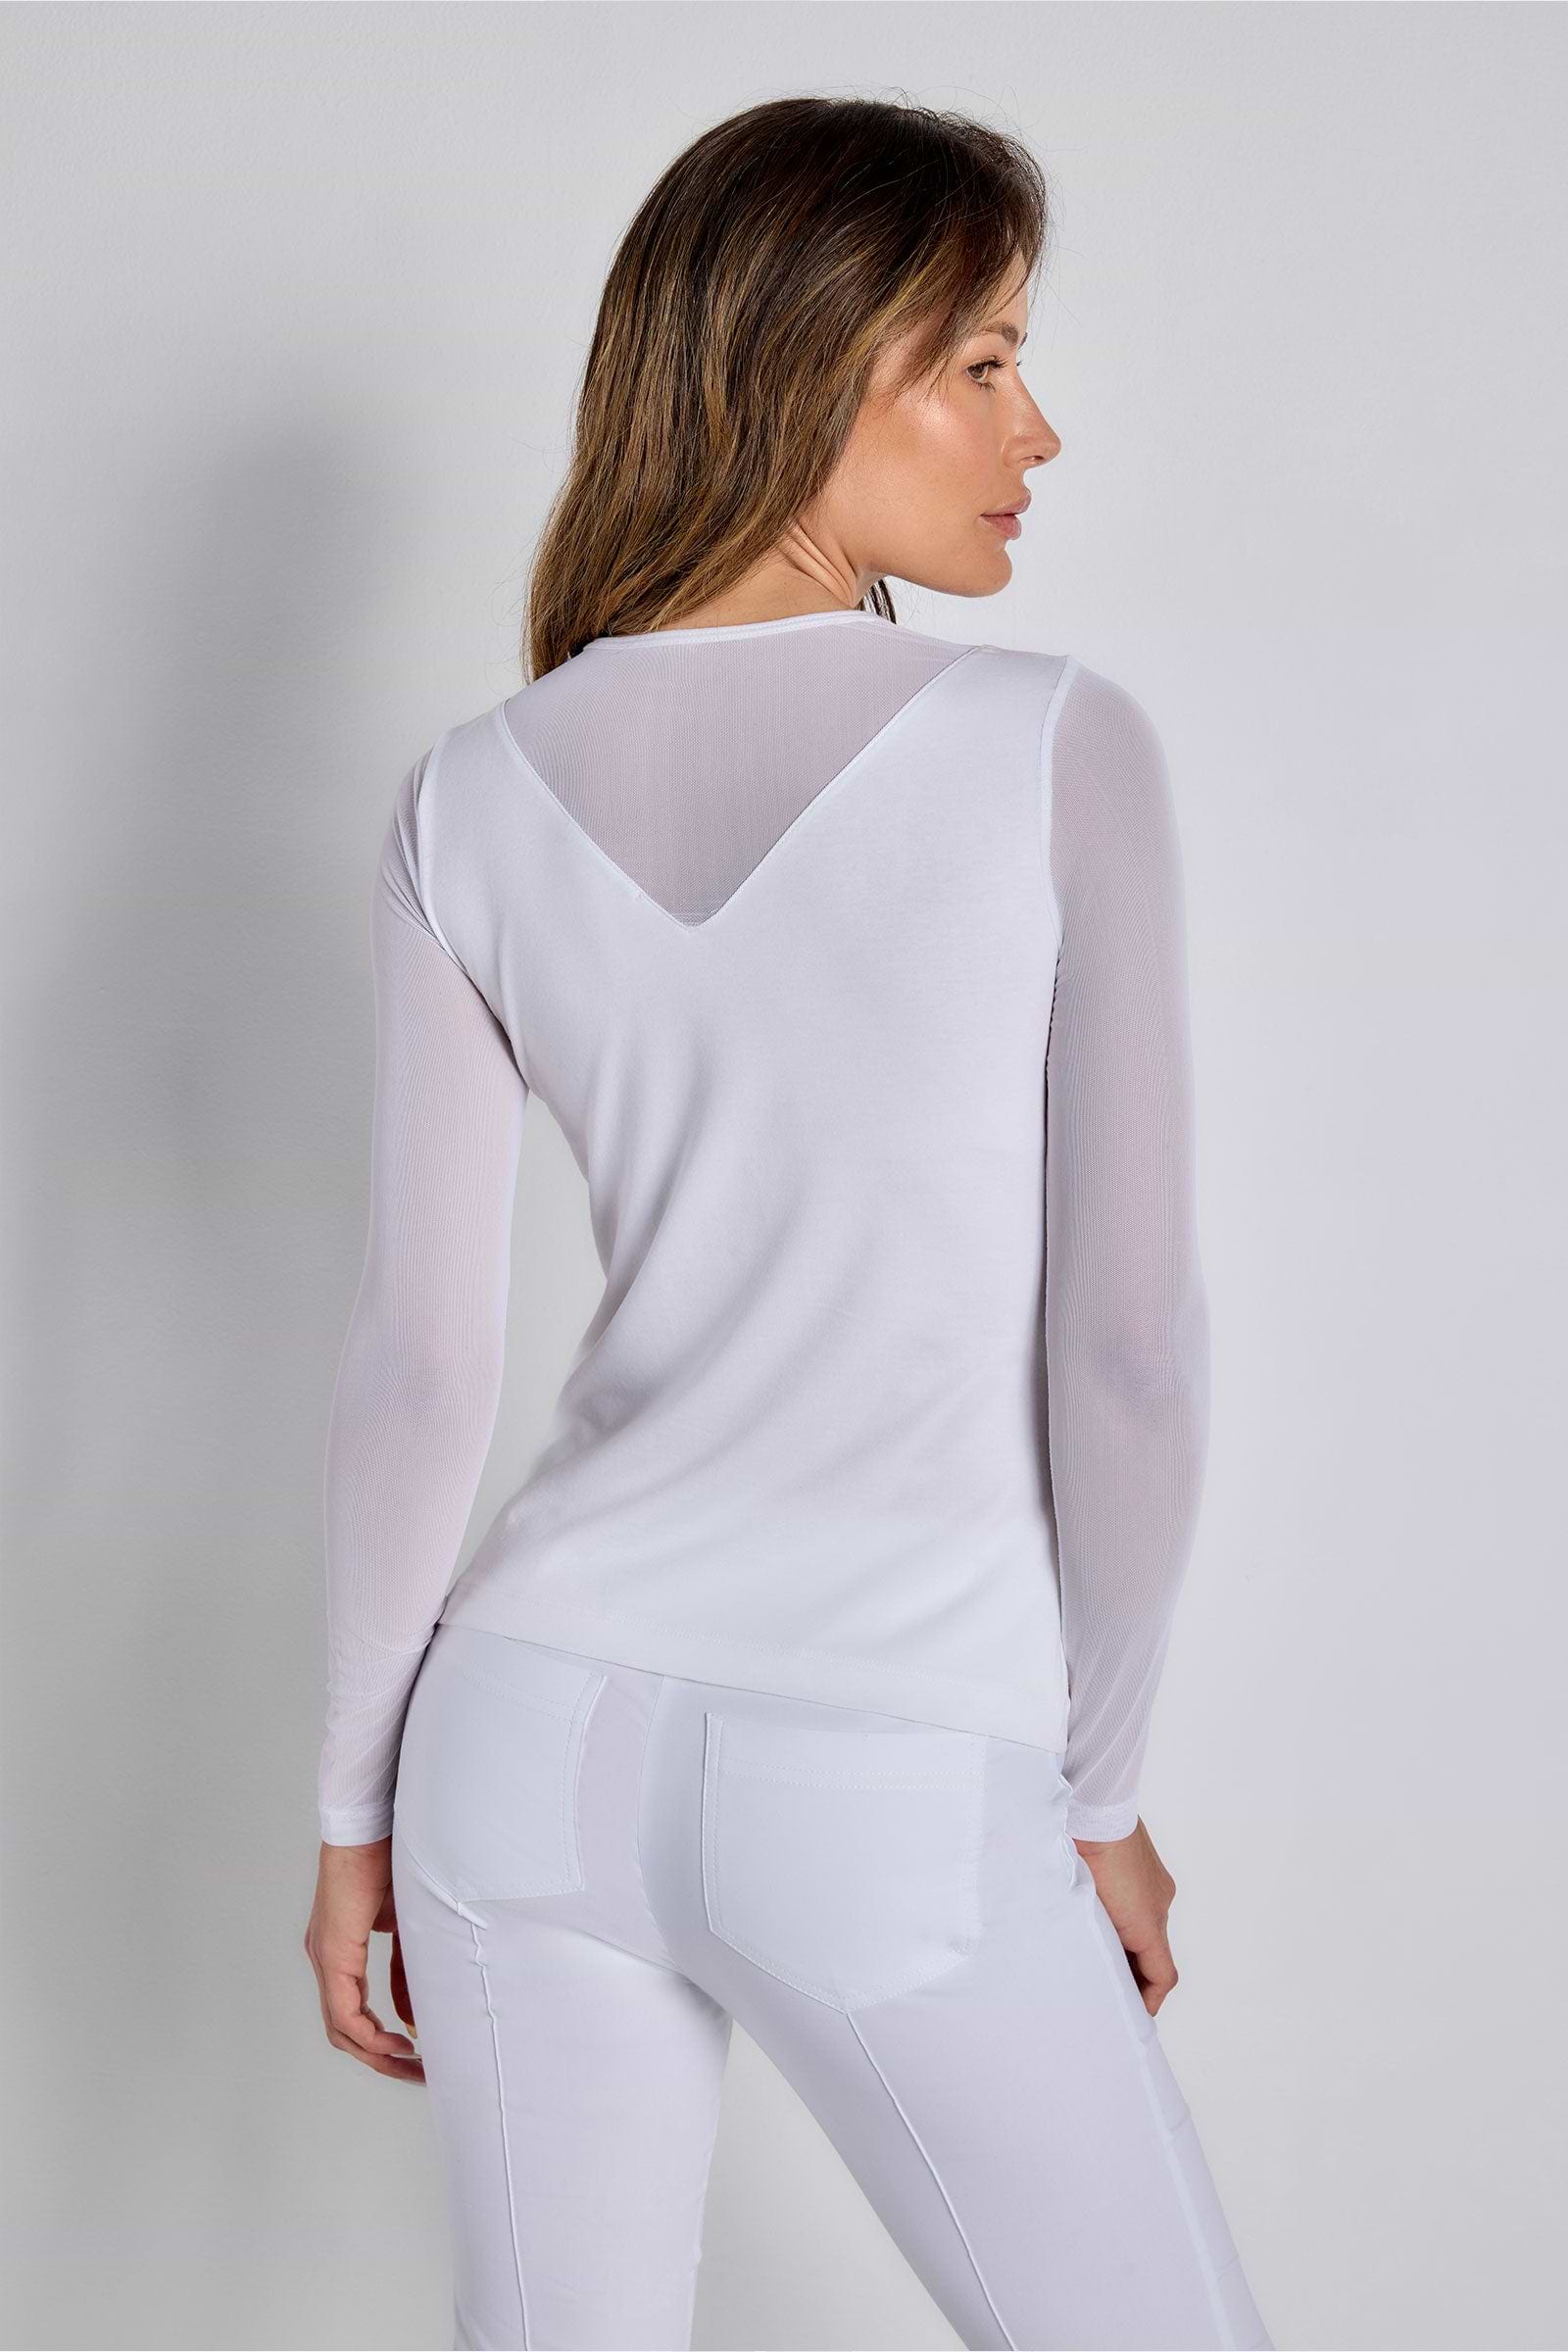 The Best Travel Top. Woman Showing the Back Profile of a Kim Mesh-Sleeve Top in Pima Modal in White.